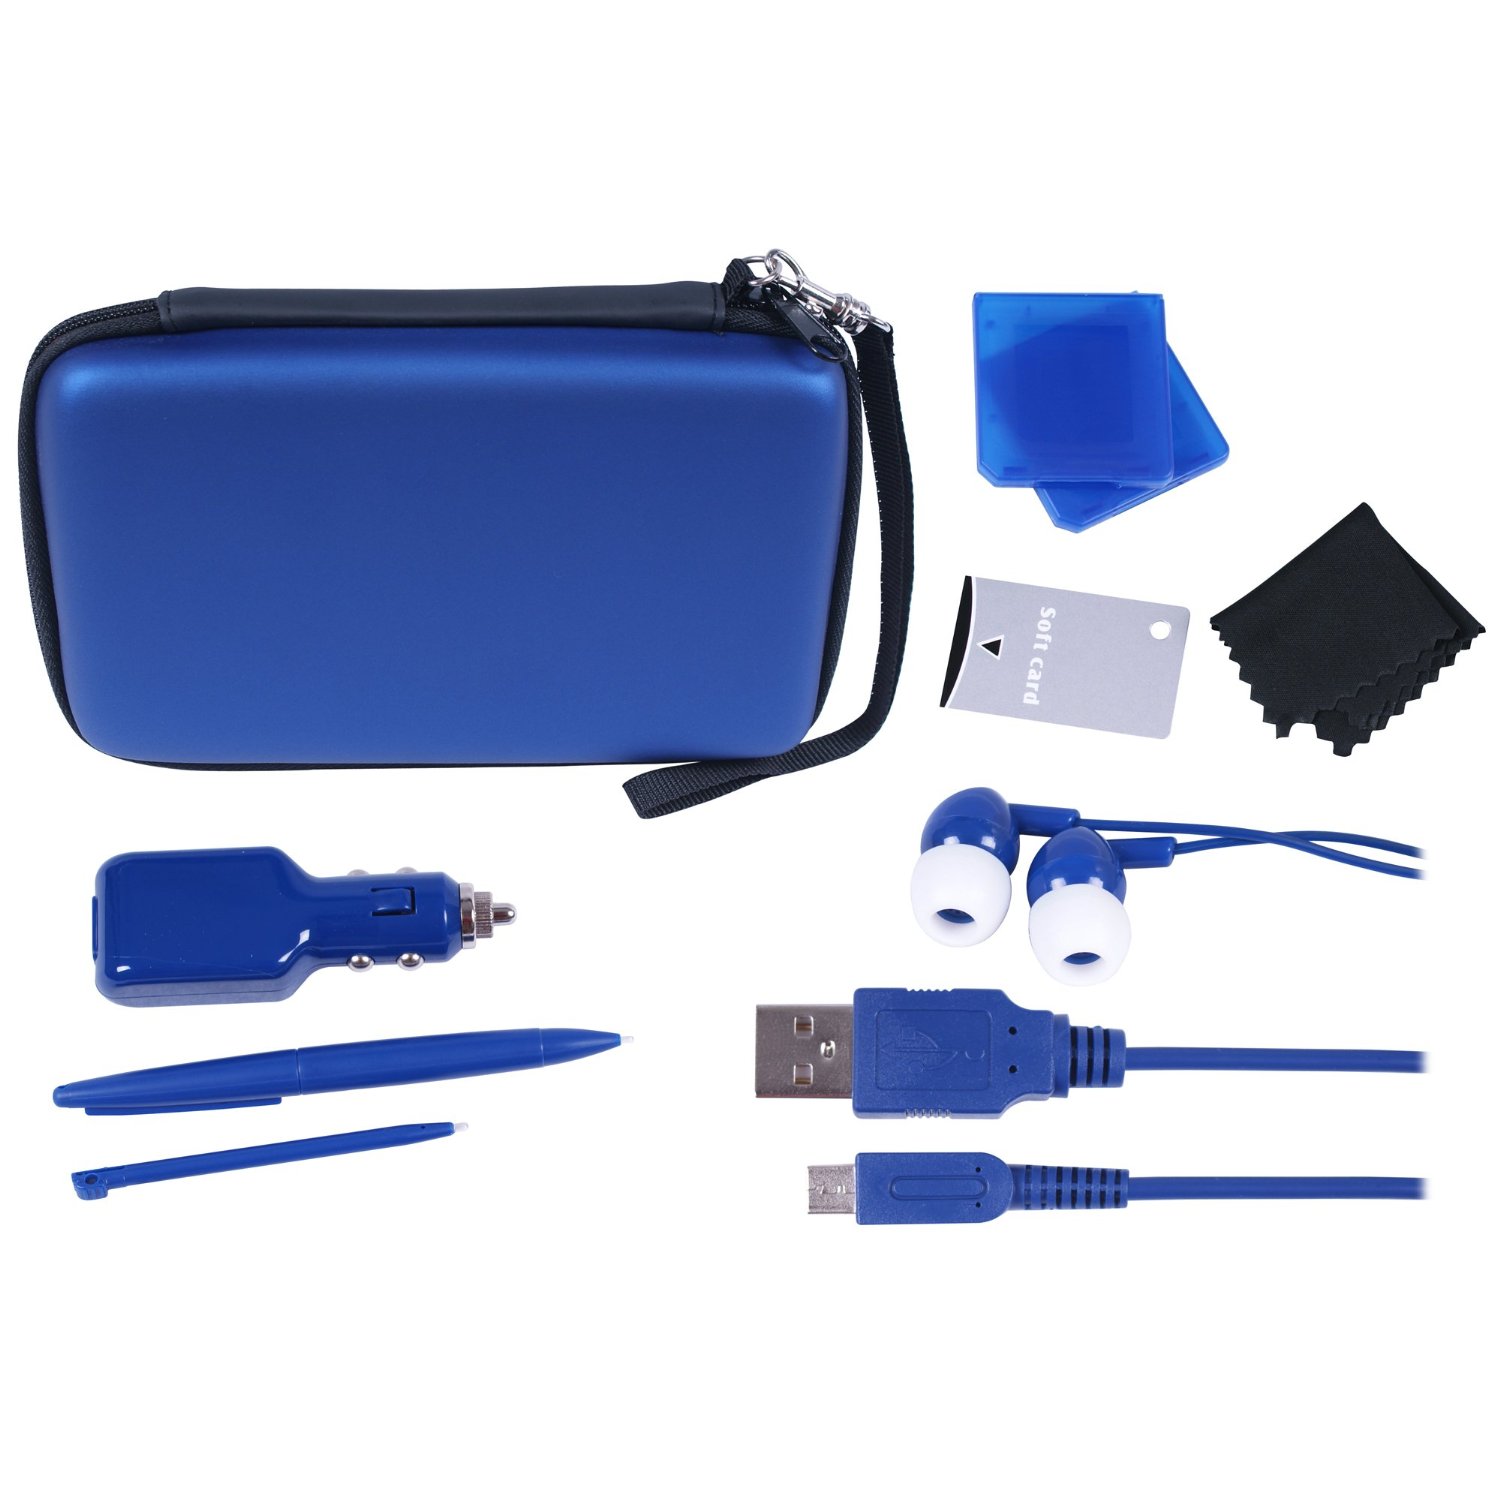 Crown DSI XL 12in1 Deluxe Pack - Blue